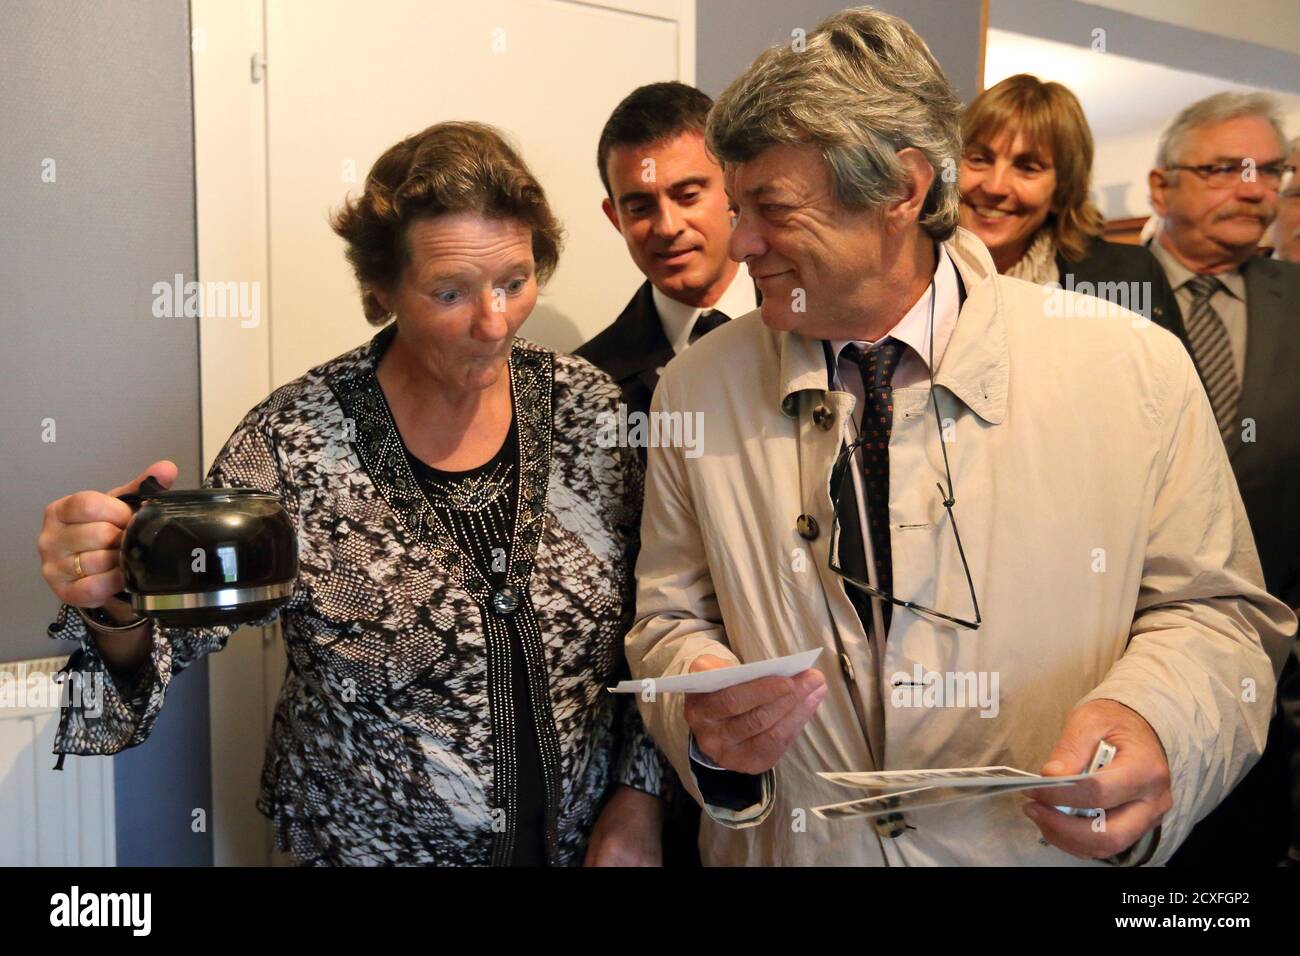 Catherine Marin, a local resident, prepares a coffee to French Prime  Minister Manuel Valls (C) and Jean Louis Borloo (R), former head of the  Union Democratic Independant (UDI) political party, as they